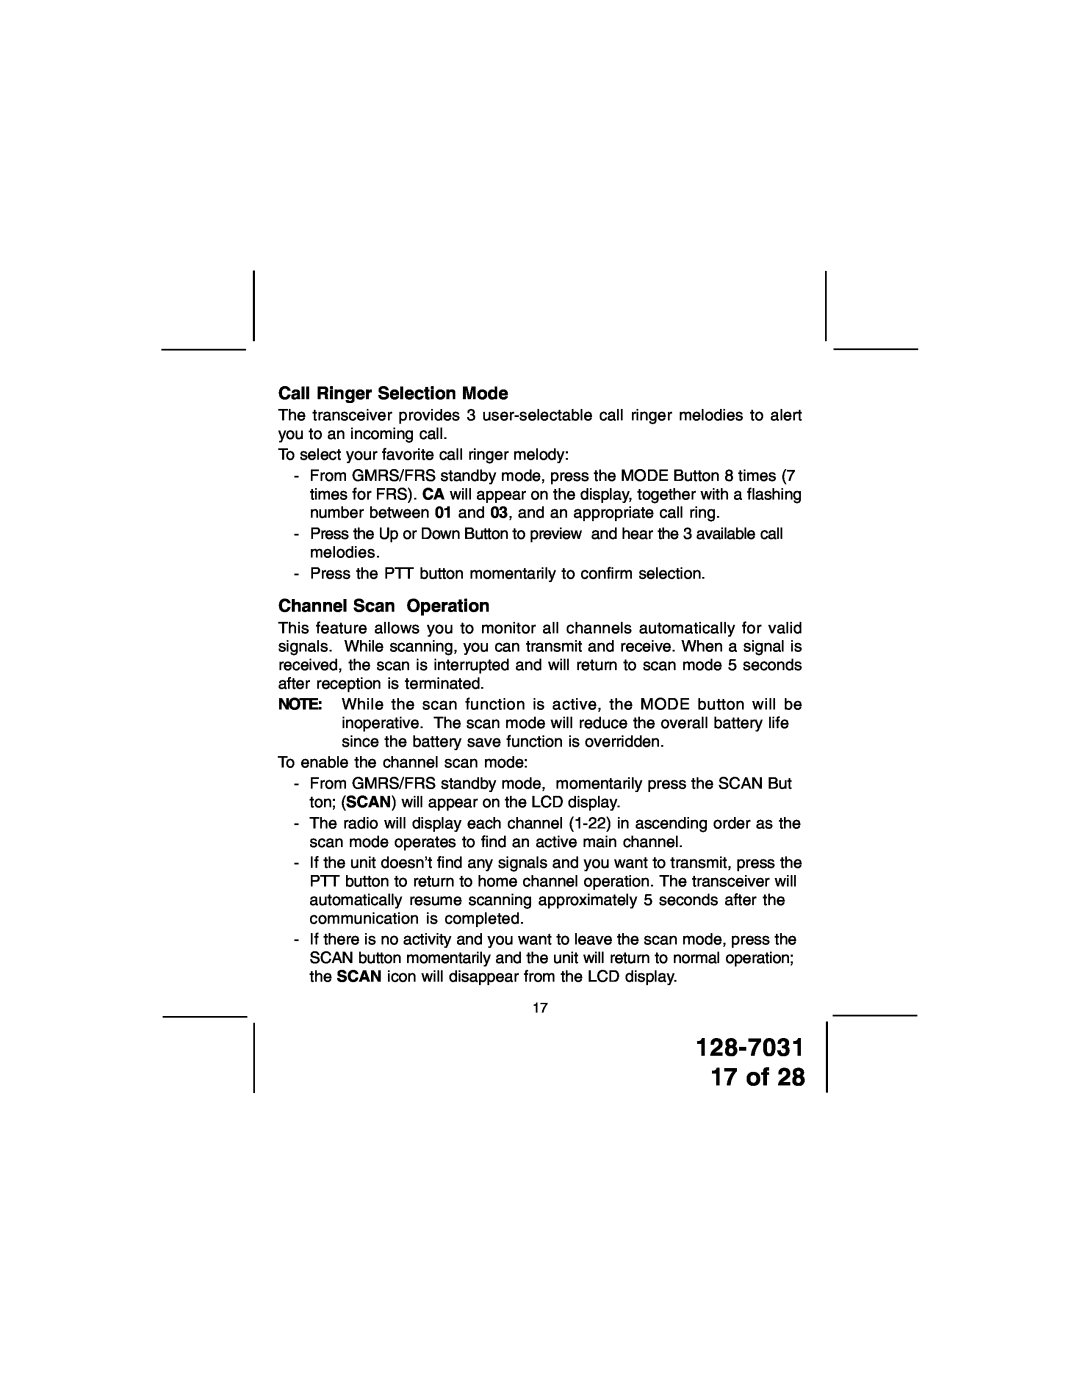 Audiovox owner manual 128-7031 17 of, Call Ringer Selection Mode, Channel Scan Operation 